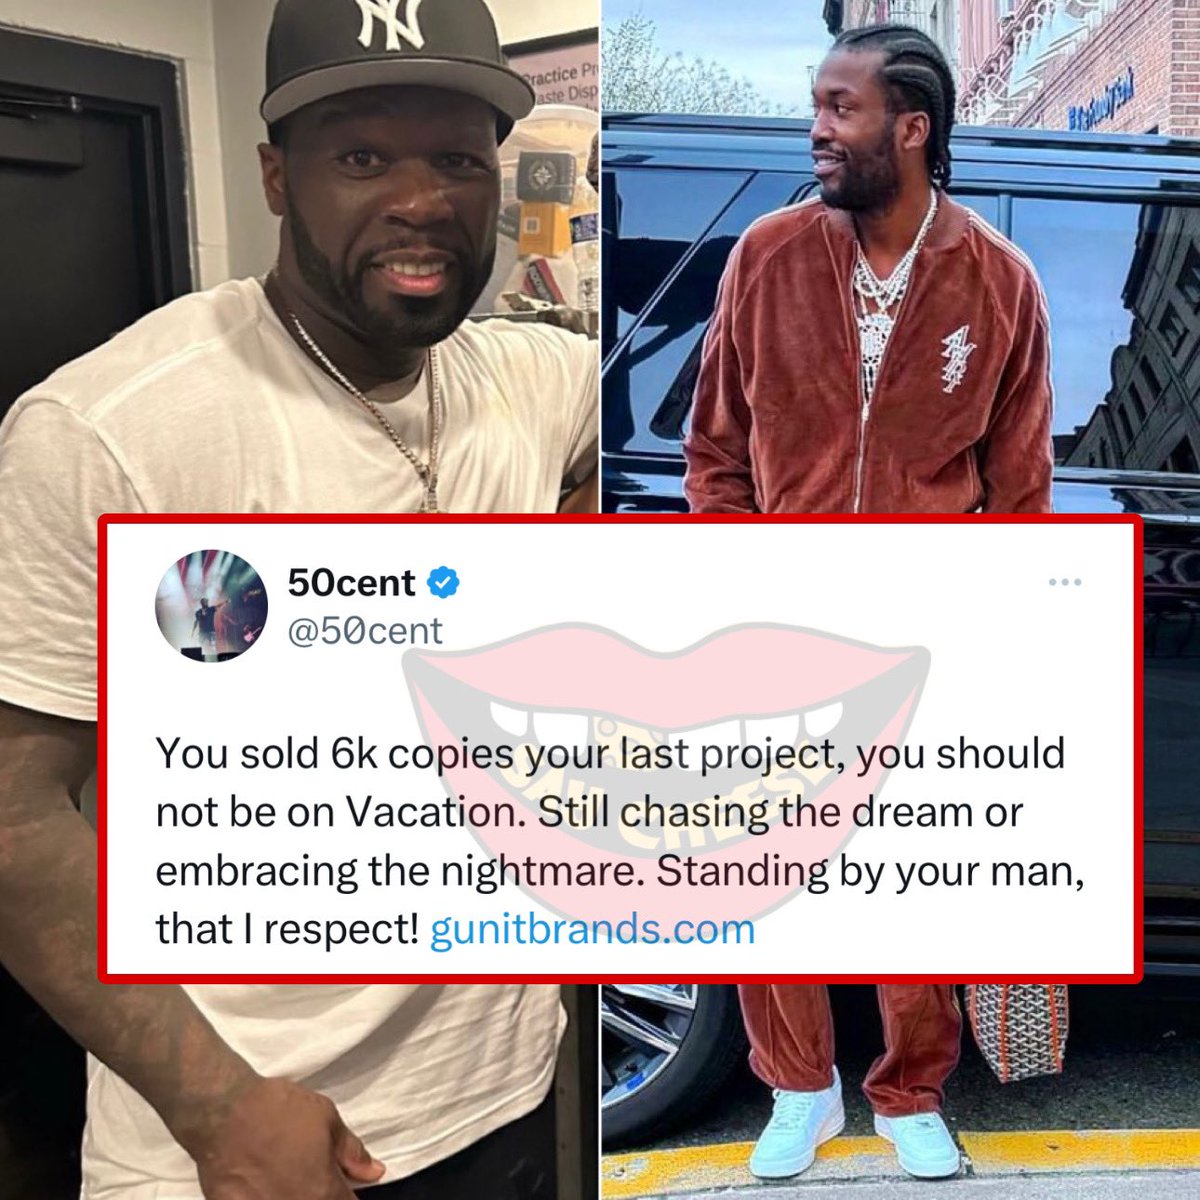 50 Cent seemingly responds to Meek Mill: “You sold 6k copies your last project you should not be on vacation! still chasing the dream or embracing the nightmare, standing by your man that I respect”